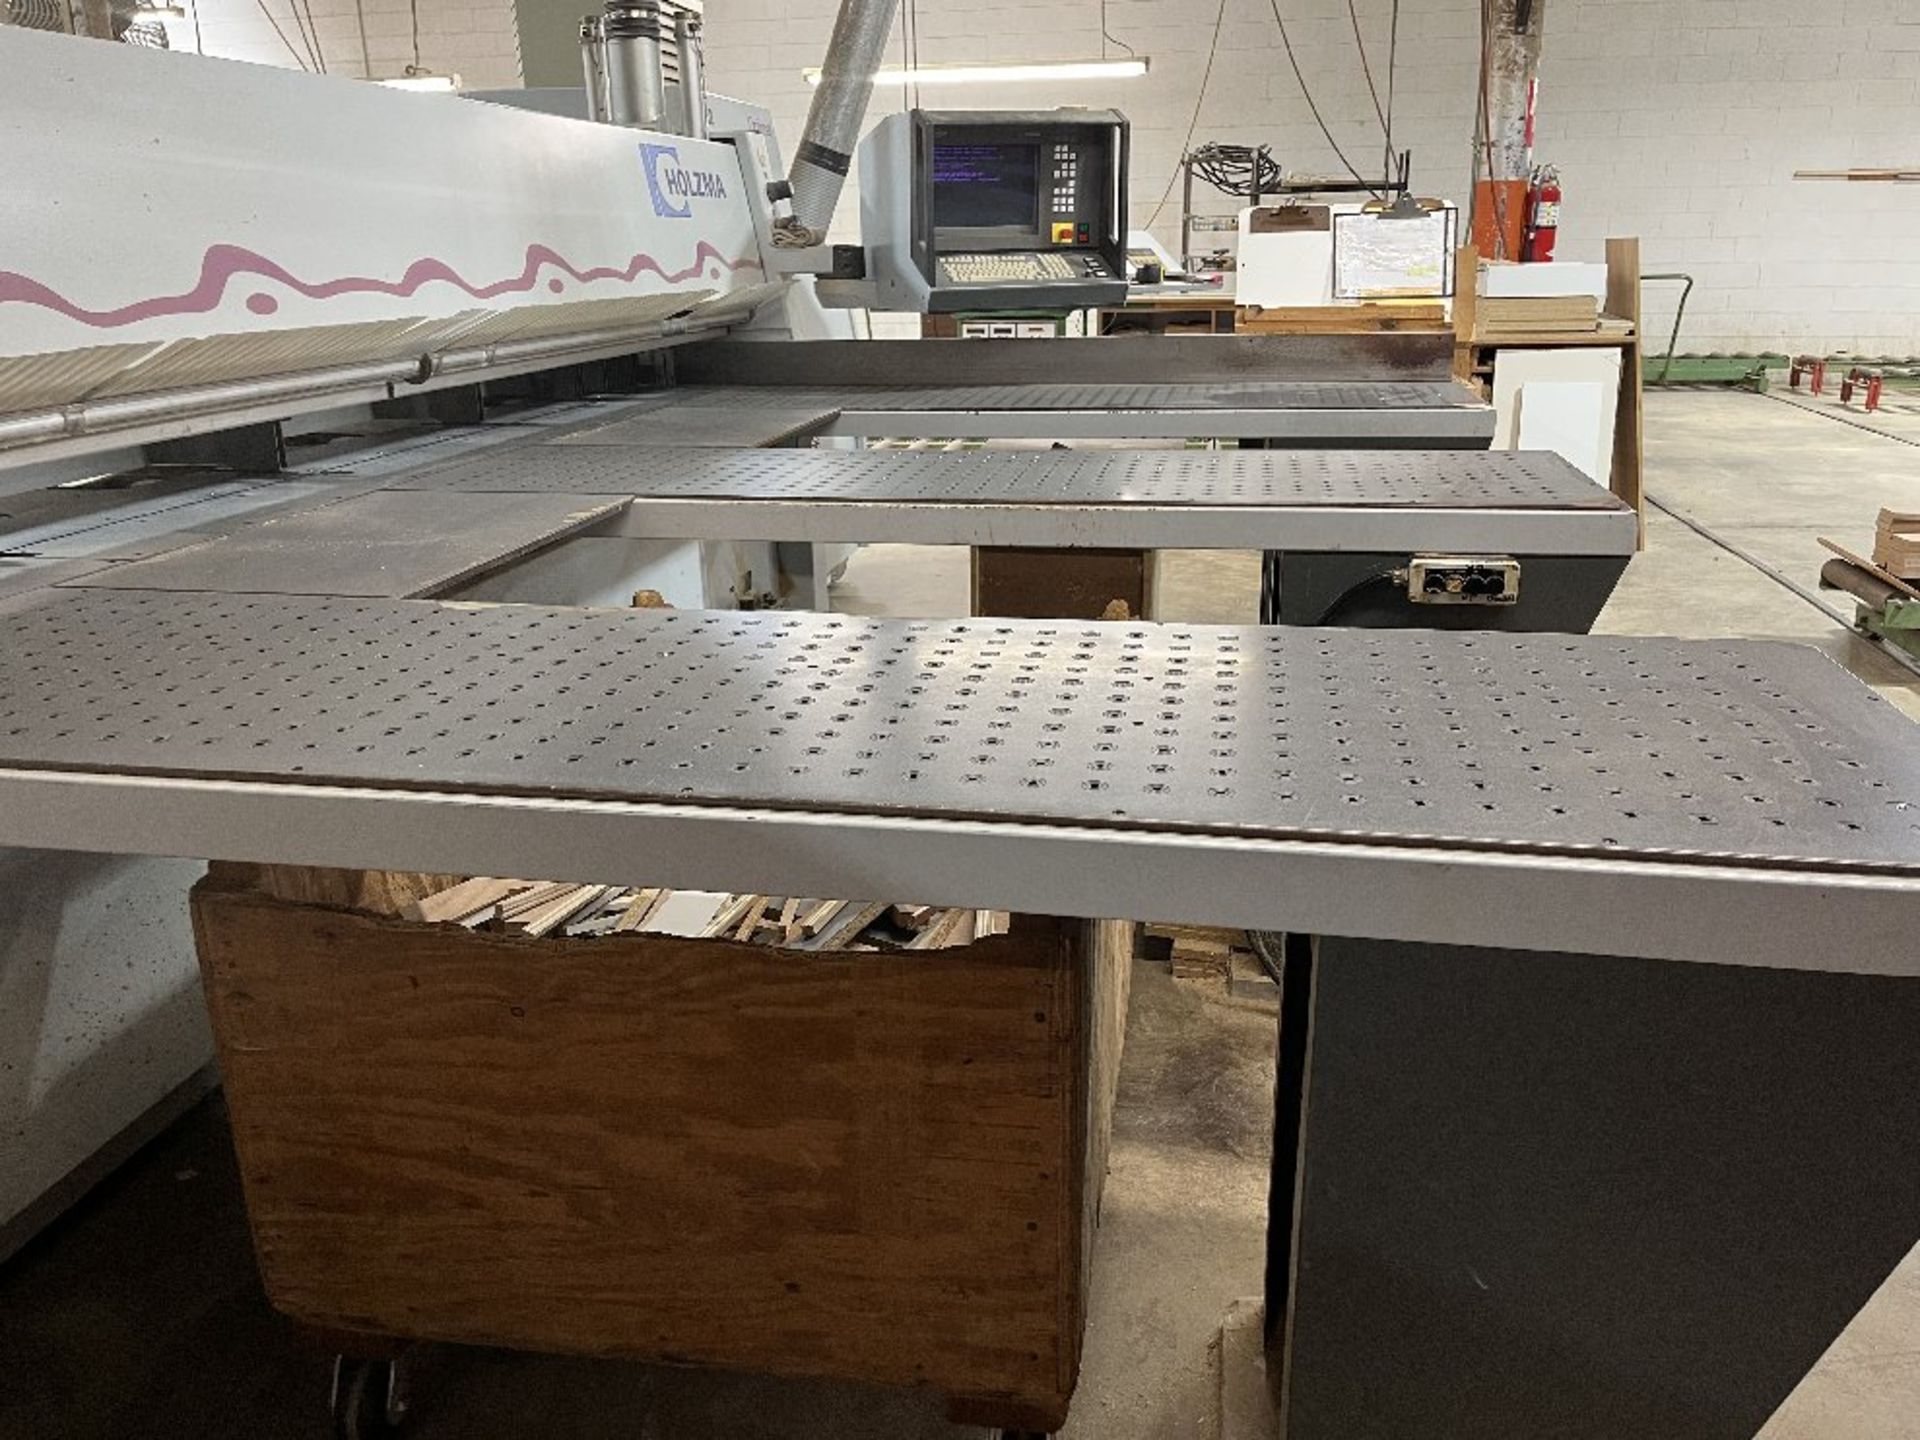 Holzma Panel Saw ModelHPP82 Optimat, S/N 0-240-15-2288, with 13' x 17' Table, Three 2' x 7' Air - Image 5 of 7